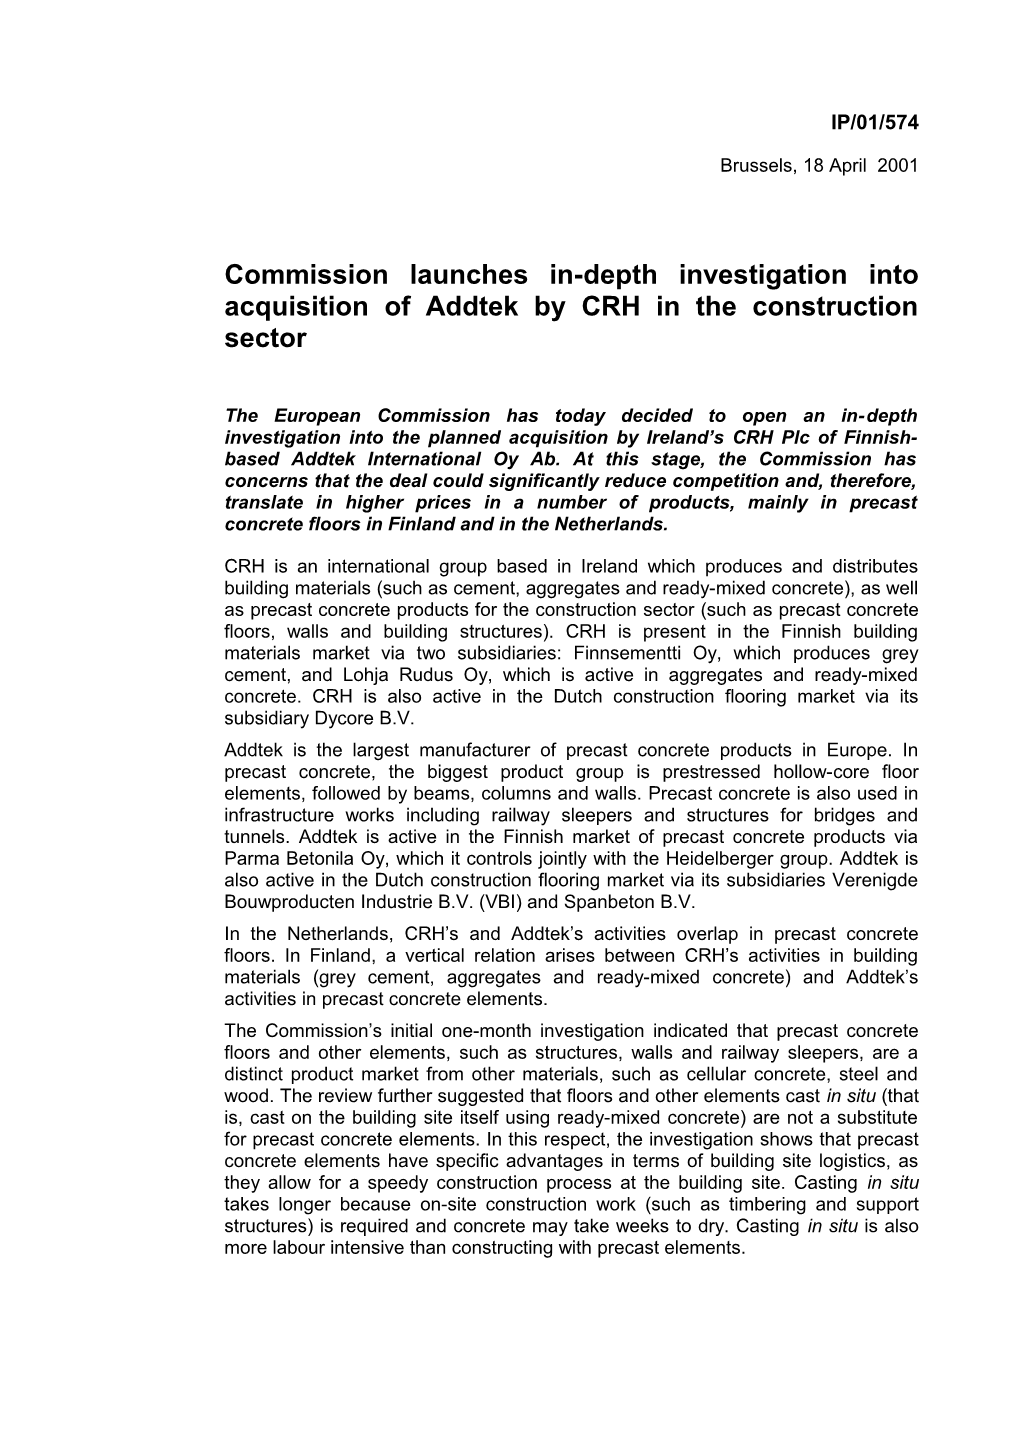 Commission Launches Indepth Investigation Into Acquisition of Addtek by CRH in the Construction